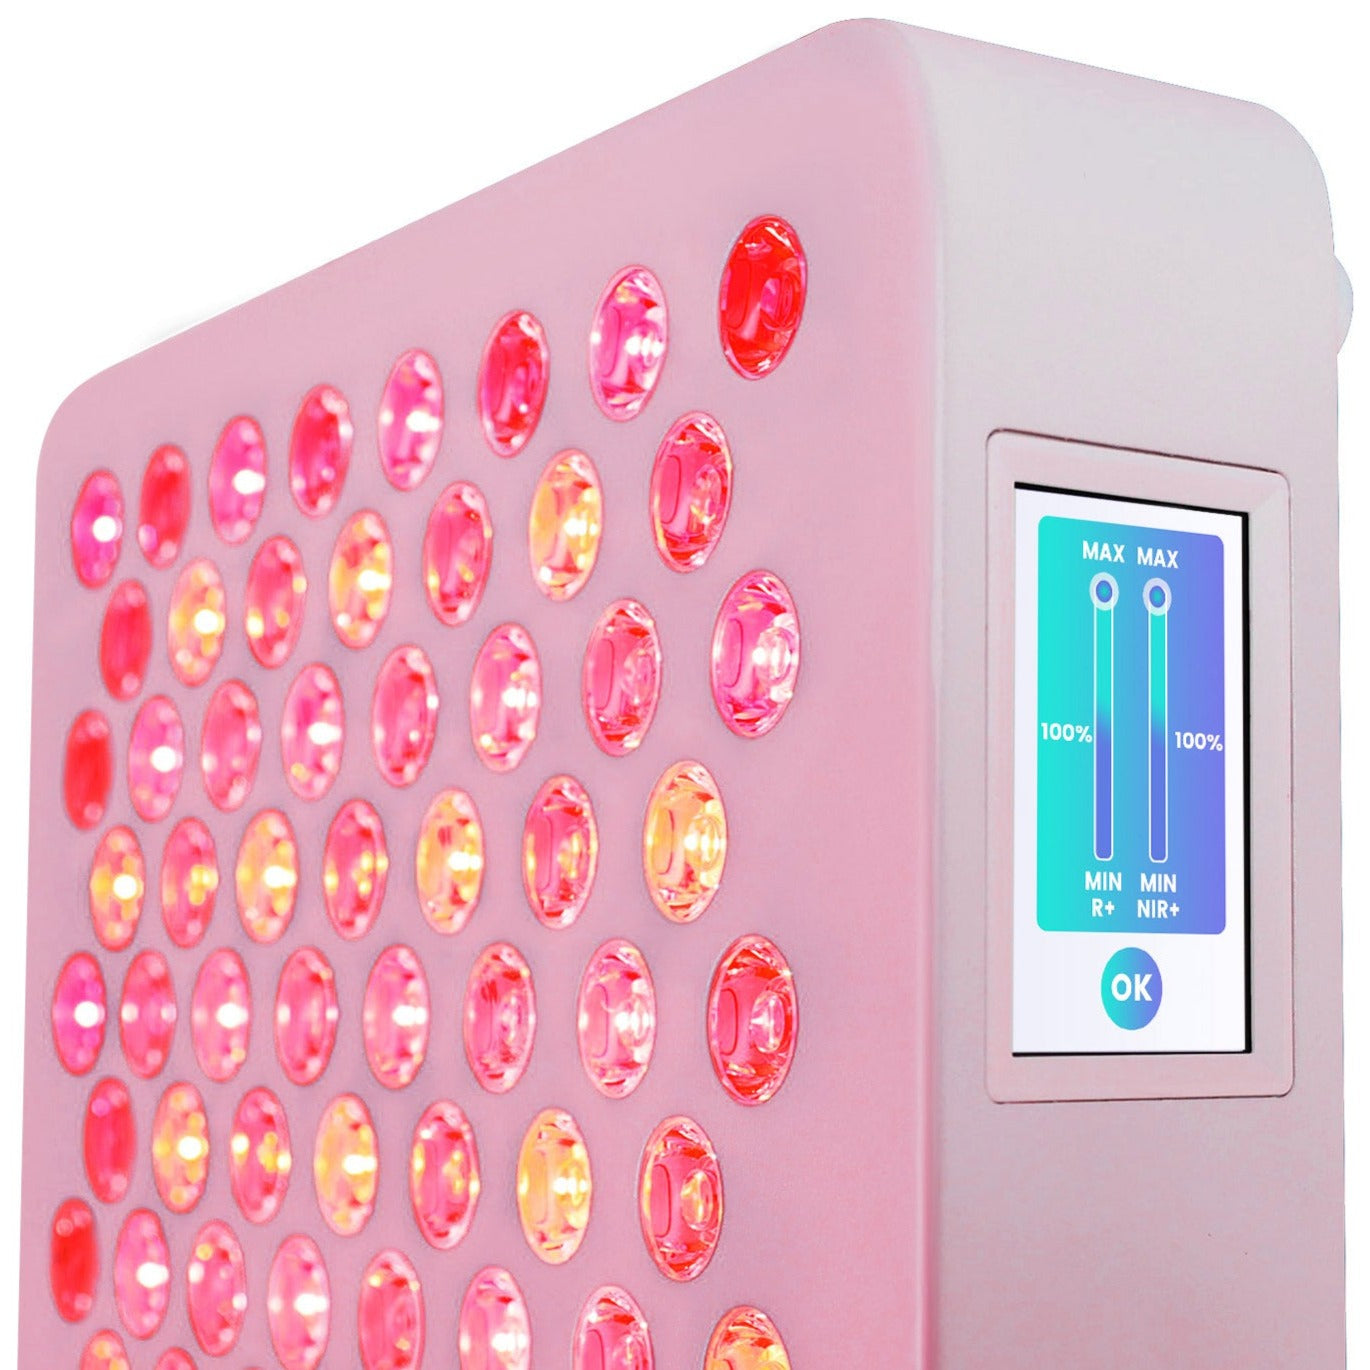 Red Light Therapy PowerPanel - MID